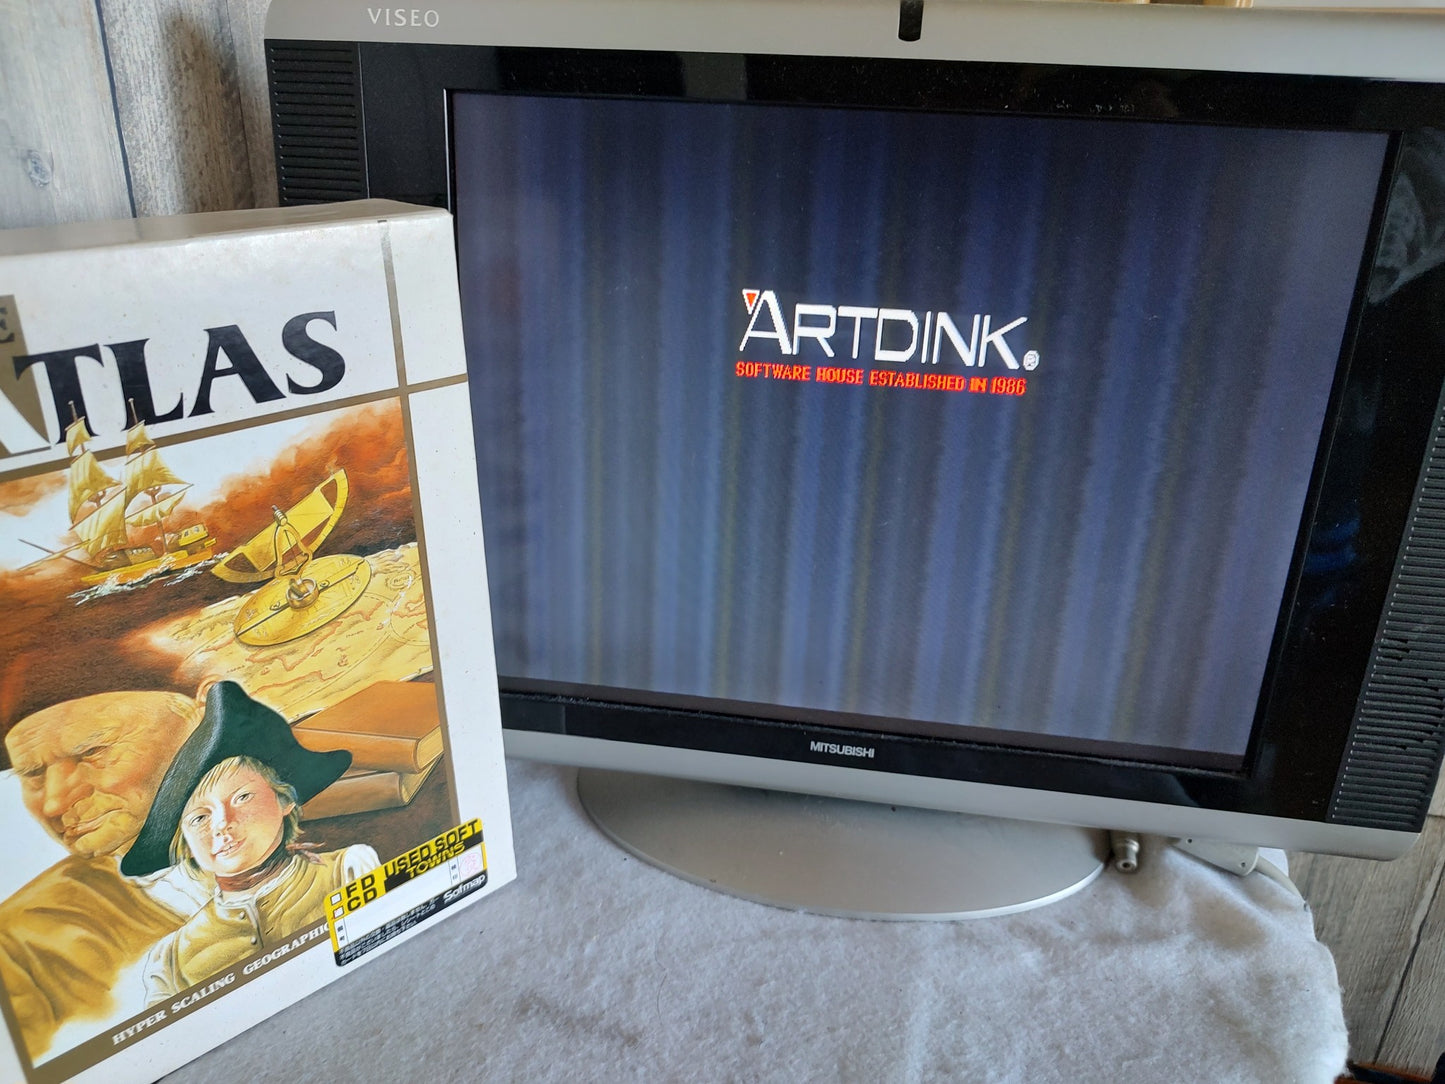 THE ATLAS ARTDINK FM TOWNS Marty Game w/Manual, Box set, Working-f1022-